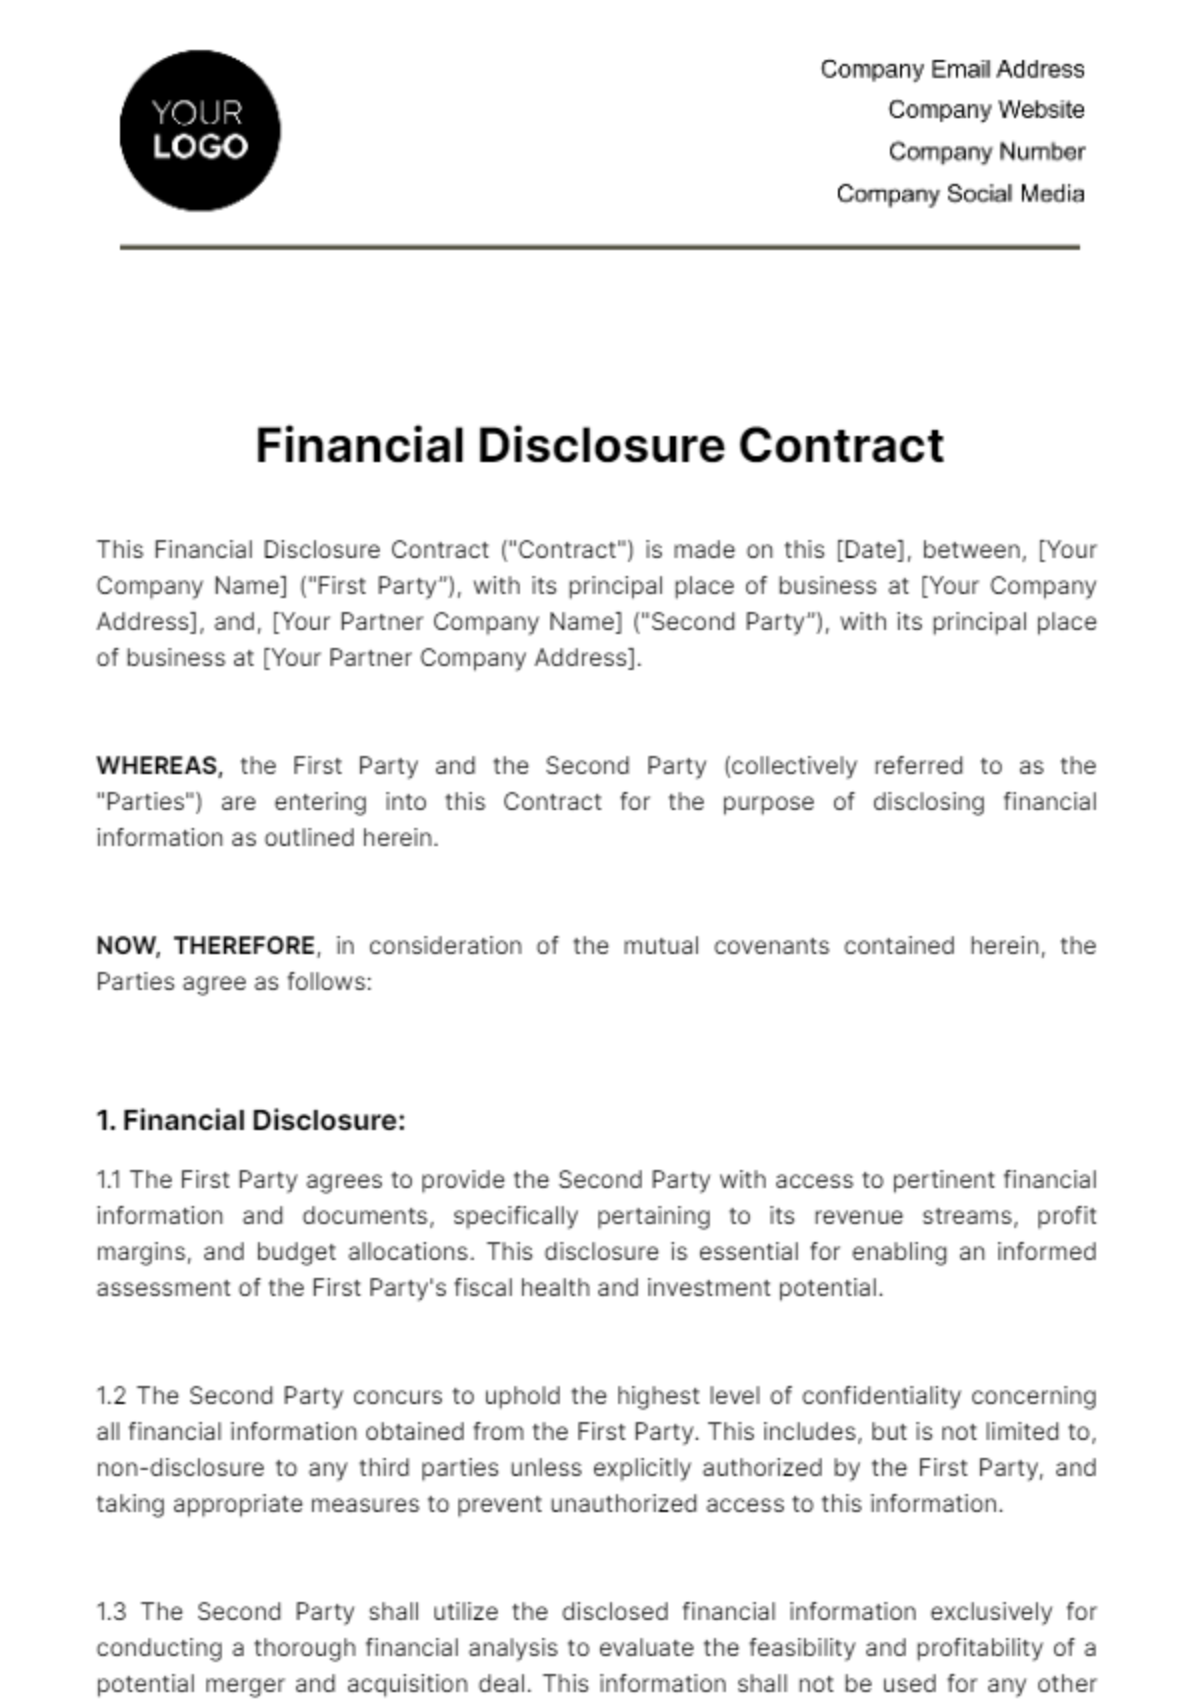 Free Financial Disclosure Contract Template